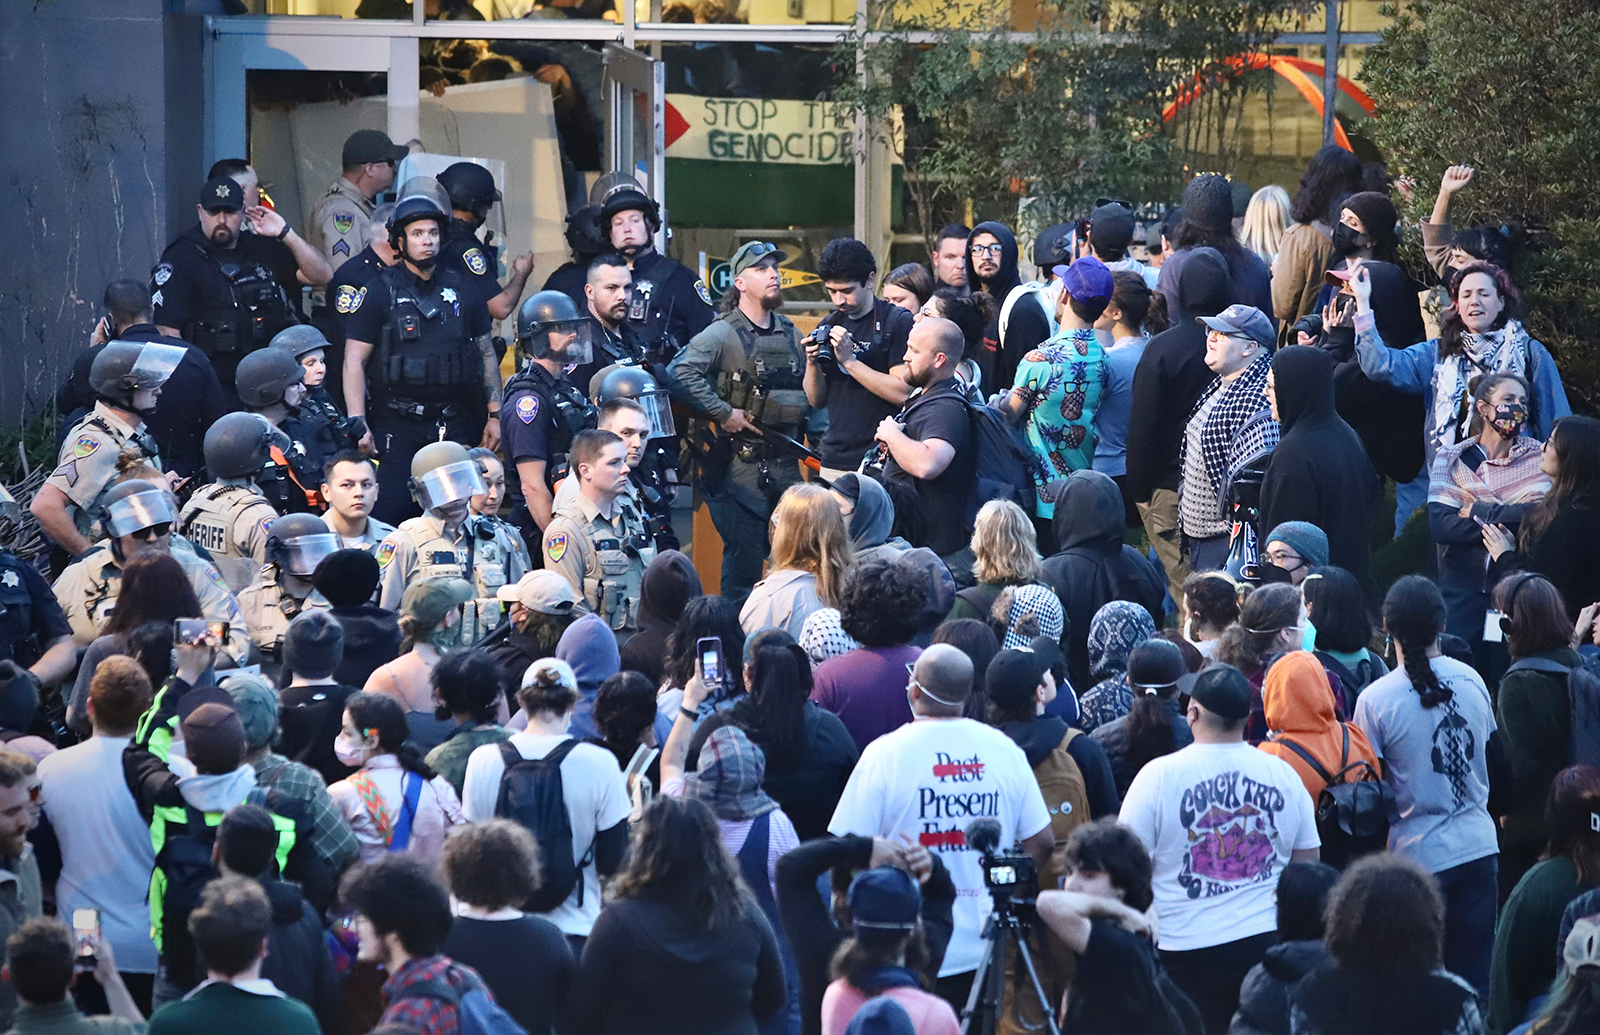 Pro-Palestinian protesters stand off with police on the campus of California State Polytechnic University, Humboldt, in Arcata, California, on April 22.